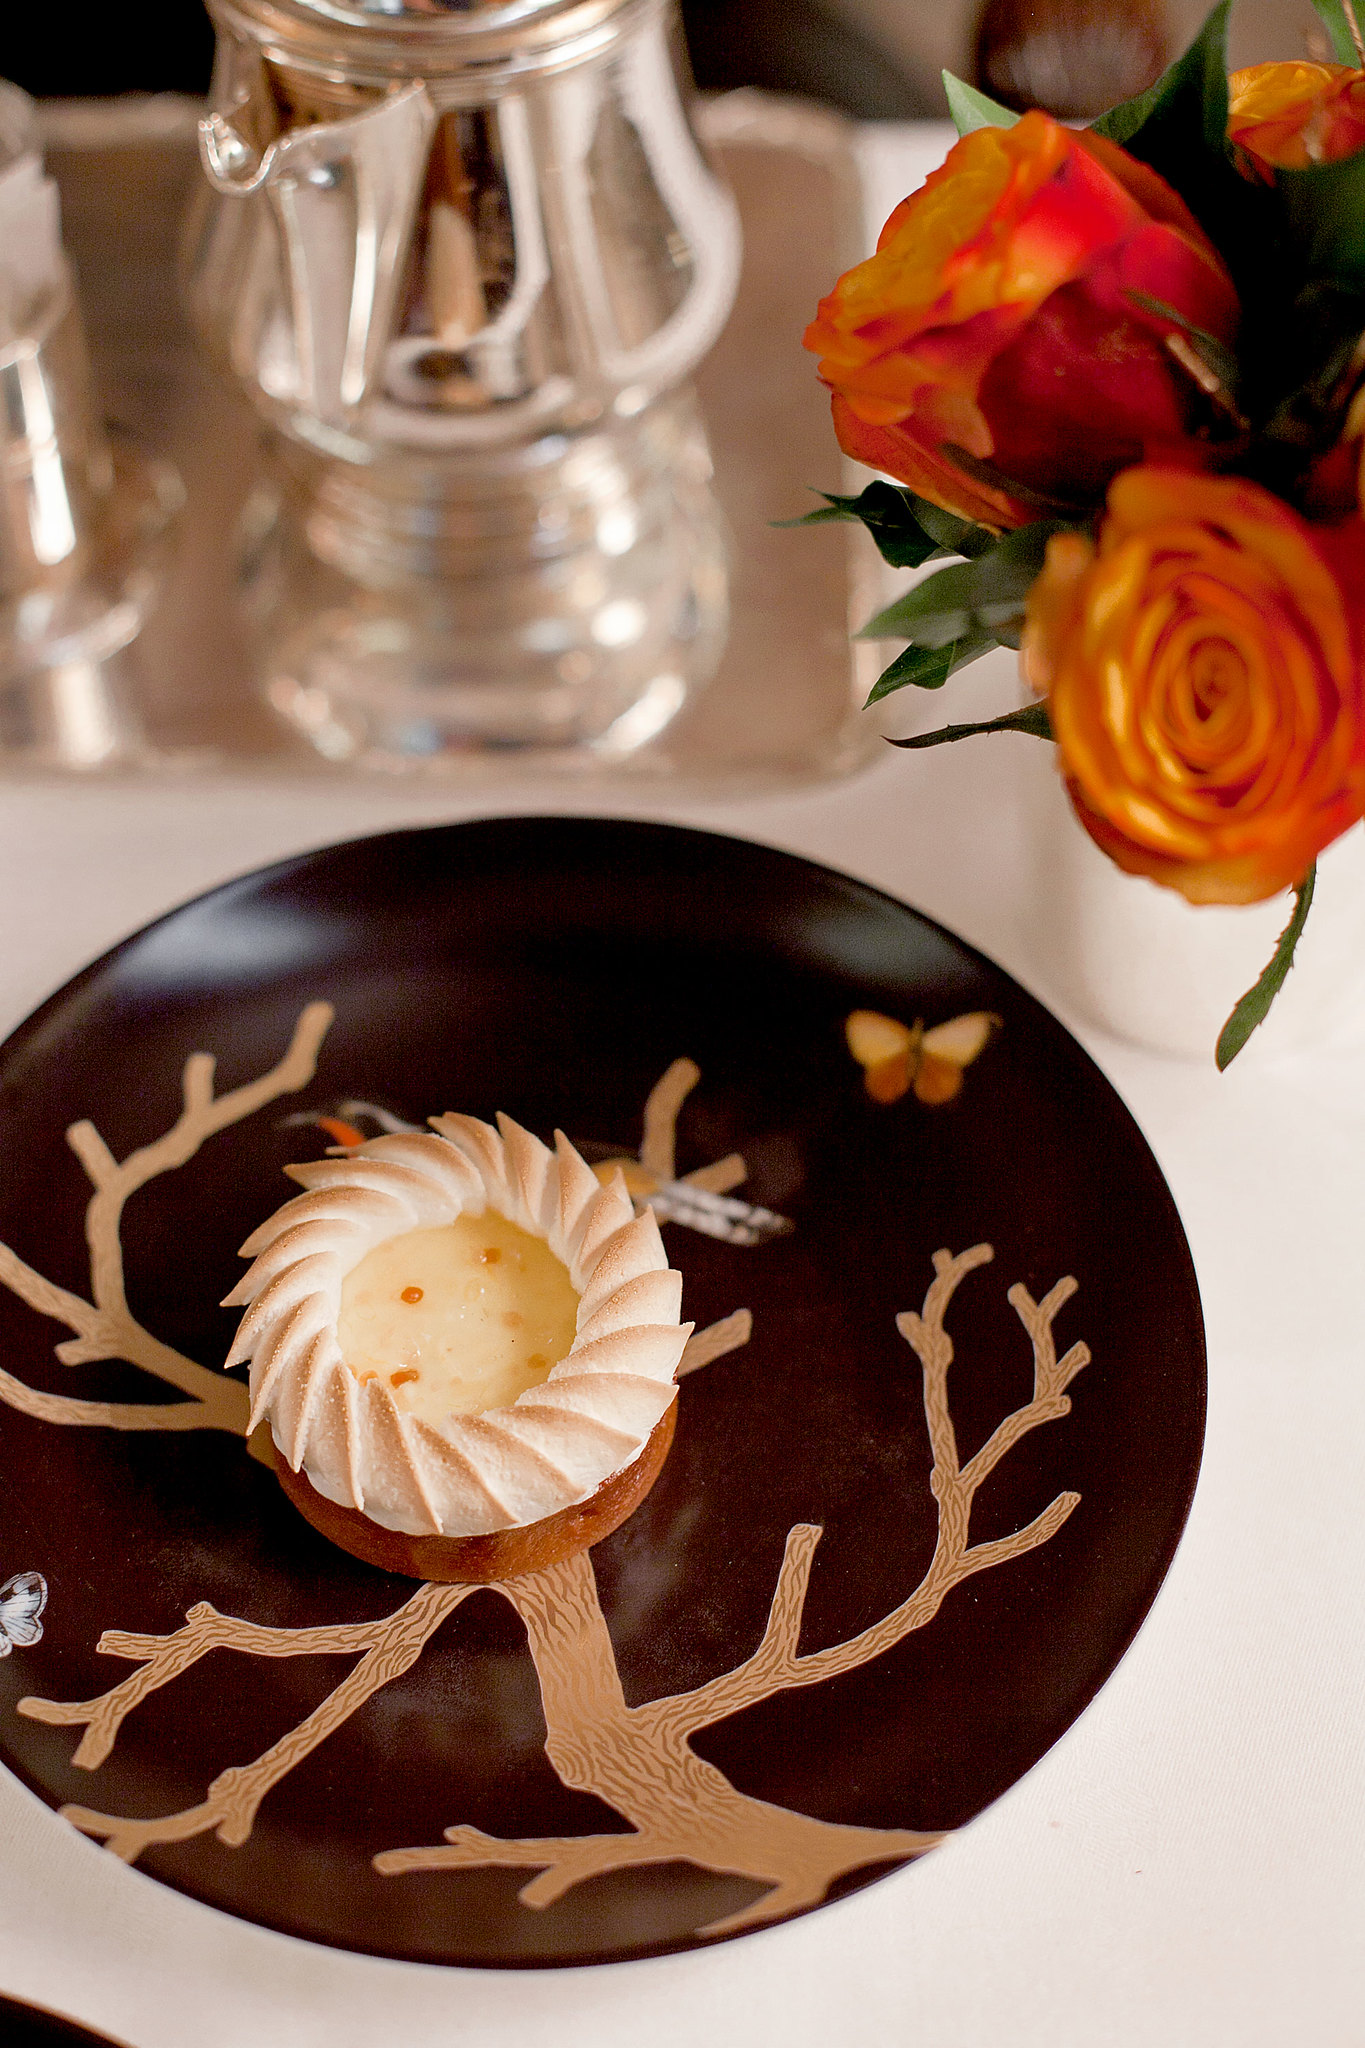 Pastry by Cédric Grolet, Hotel Le Meurice